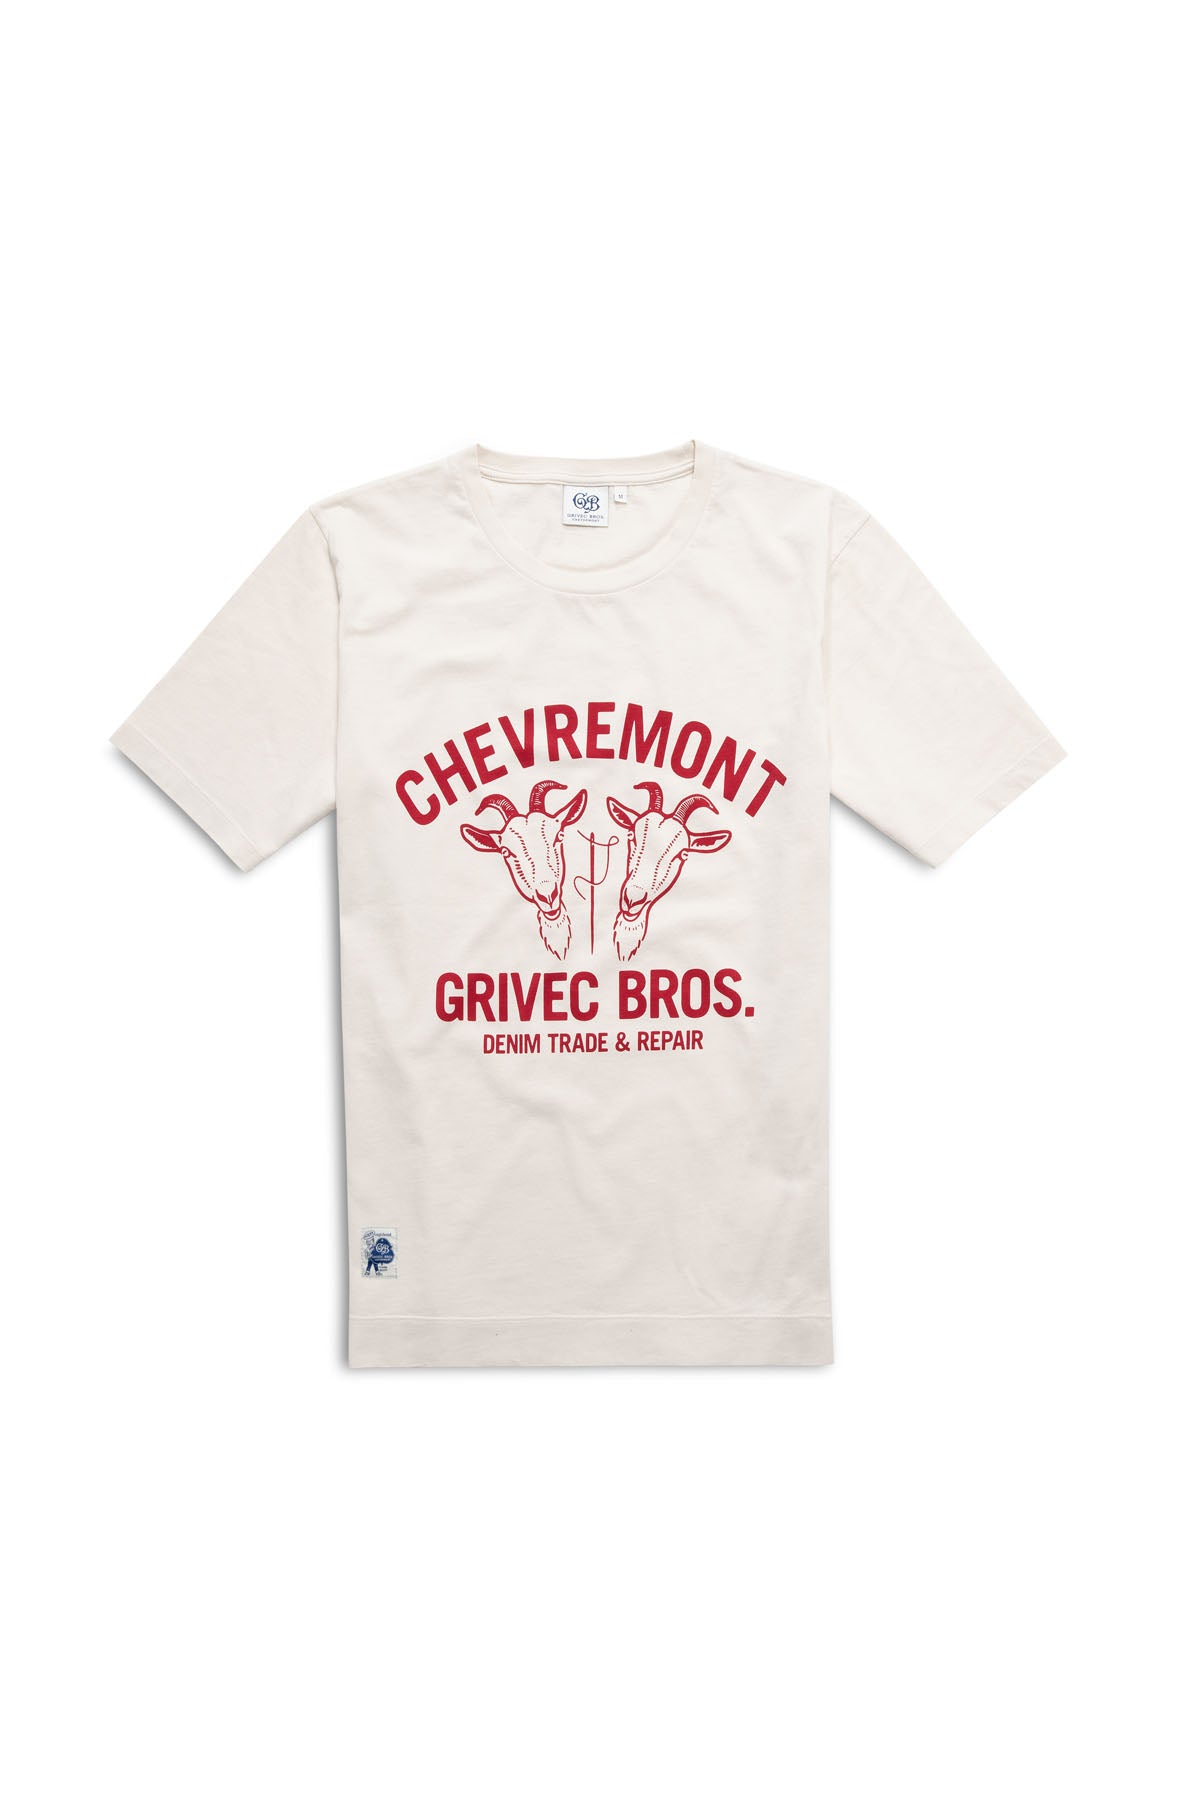 Shop Tee Off-White Red